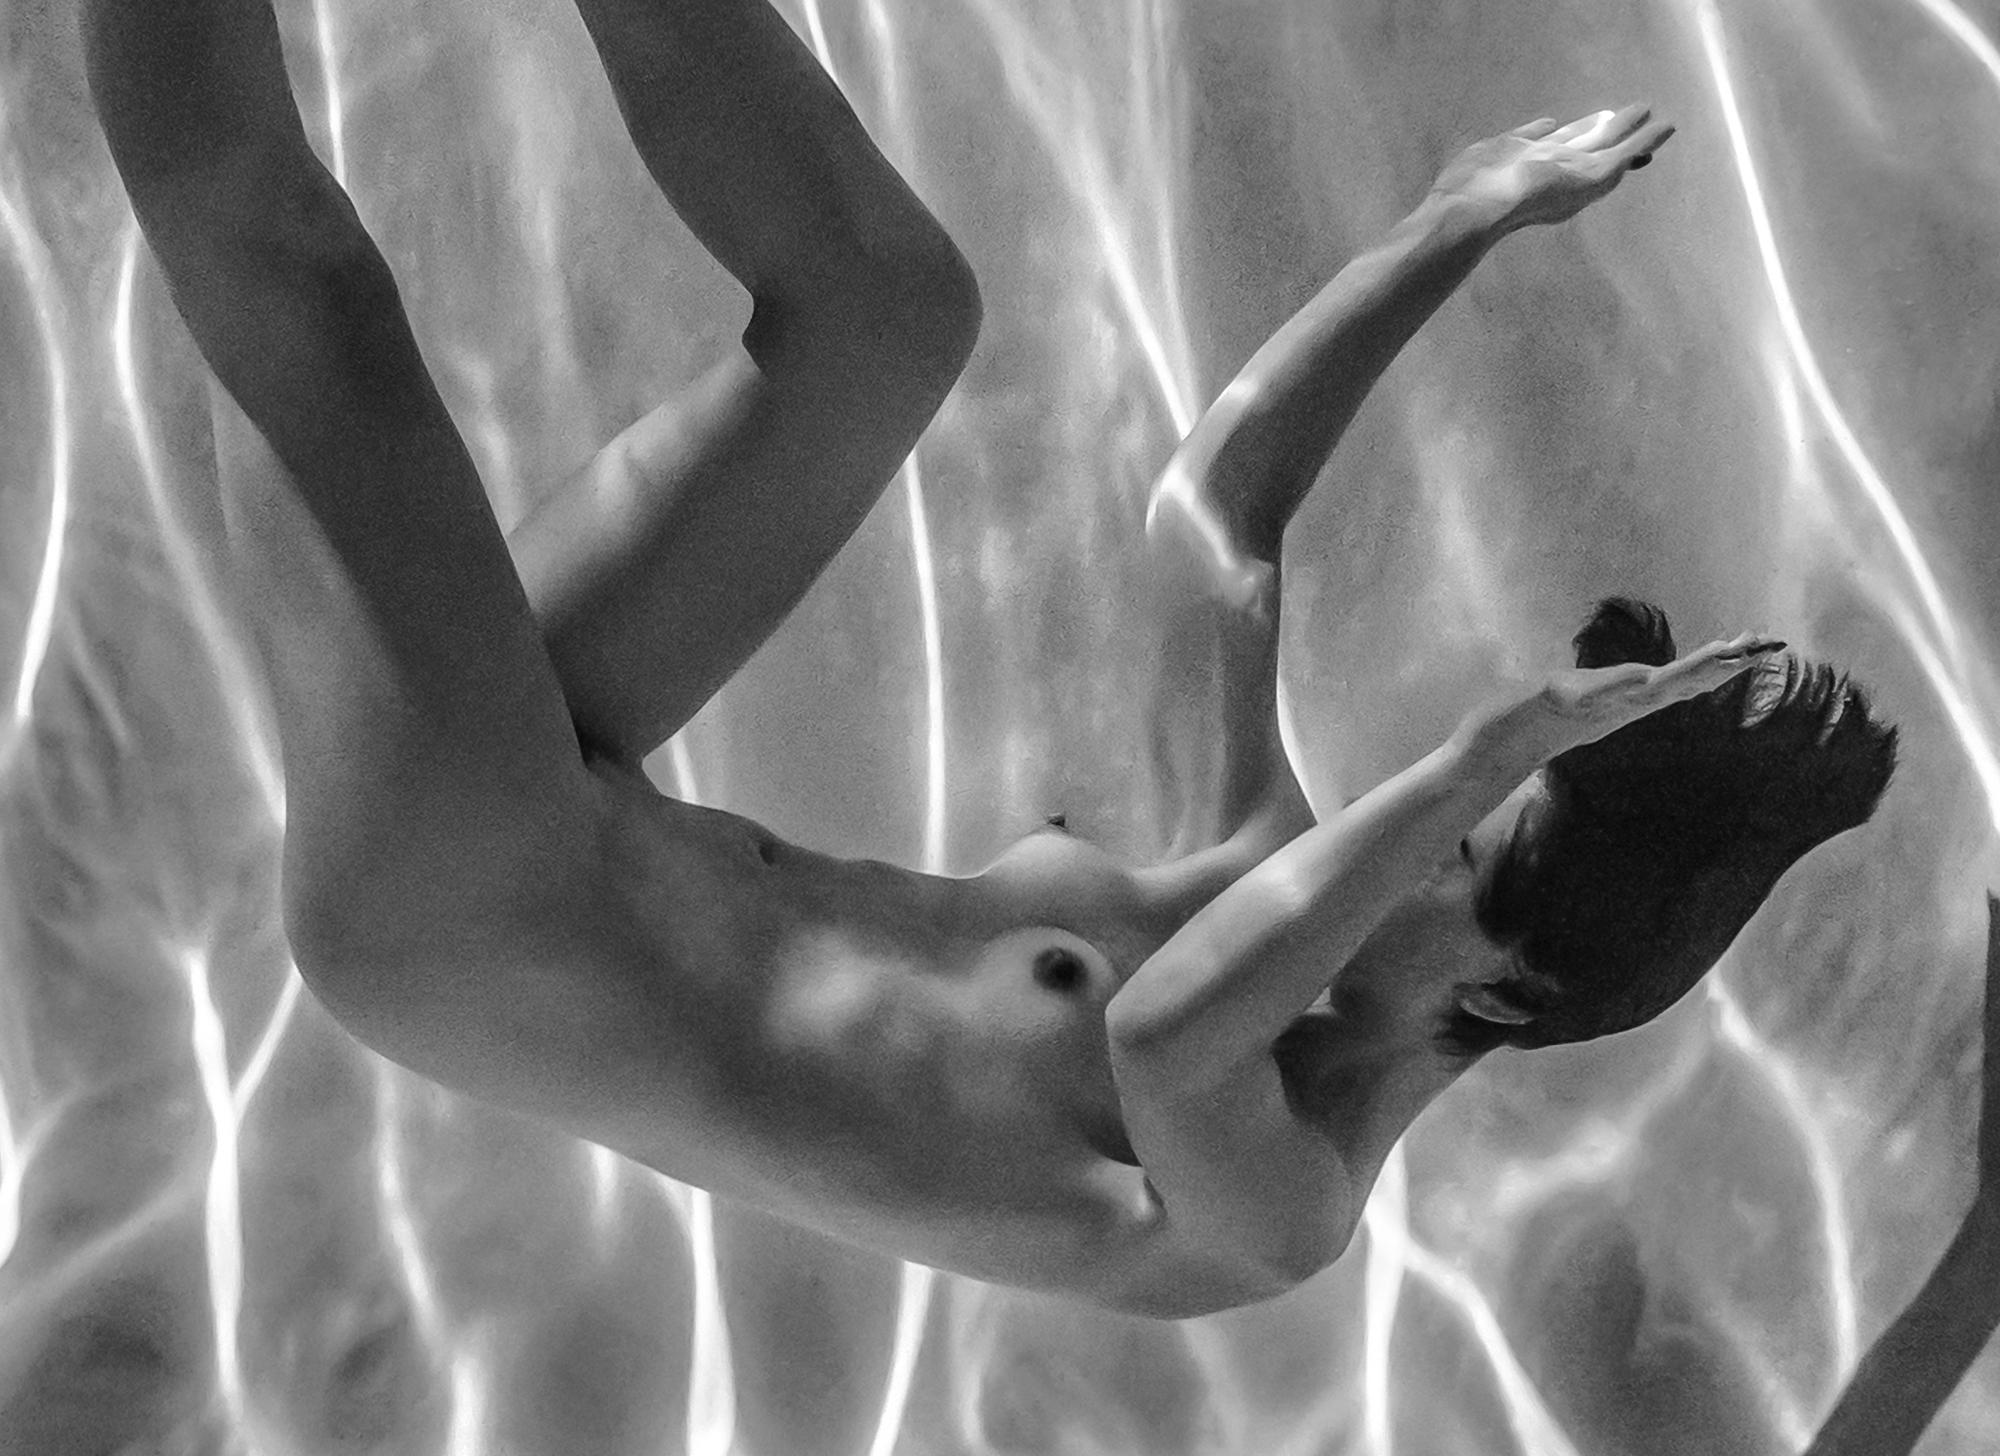 Marble Cave (triptych) - underwater b&w nude photograph - 3 prints 35